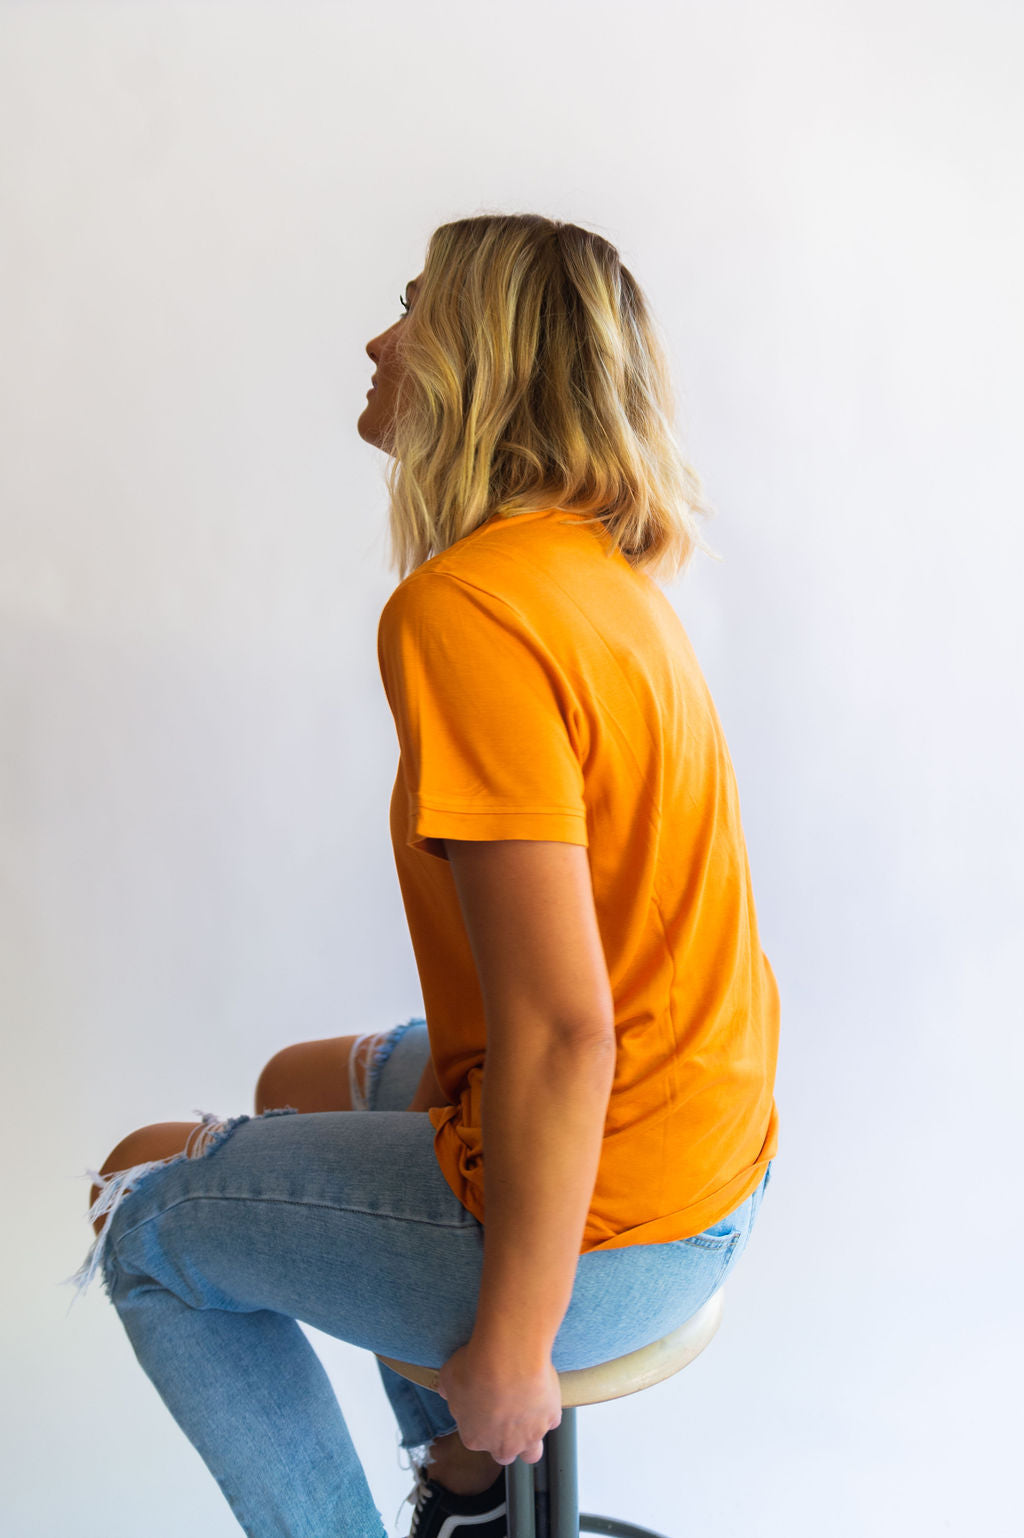 the “fancier” version of a t-shirt. the design: blank for all of our ladies who love a good basic tee! color: apricot buff tee. the material:100% viscose with a boxy, slouchy fit. the sleeves are wide with a ringer style neckline. HIGH CHANCE OF SHRINKAGE! Wash on cold and then hang dry! It will shrink in length in the dryer. Ramble & Co. is a family lifestyle brand creating simple, timeless, quality apparel. Each piece is handprinted in our brick and mortar studio located in Wichita Falls, Texas.  